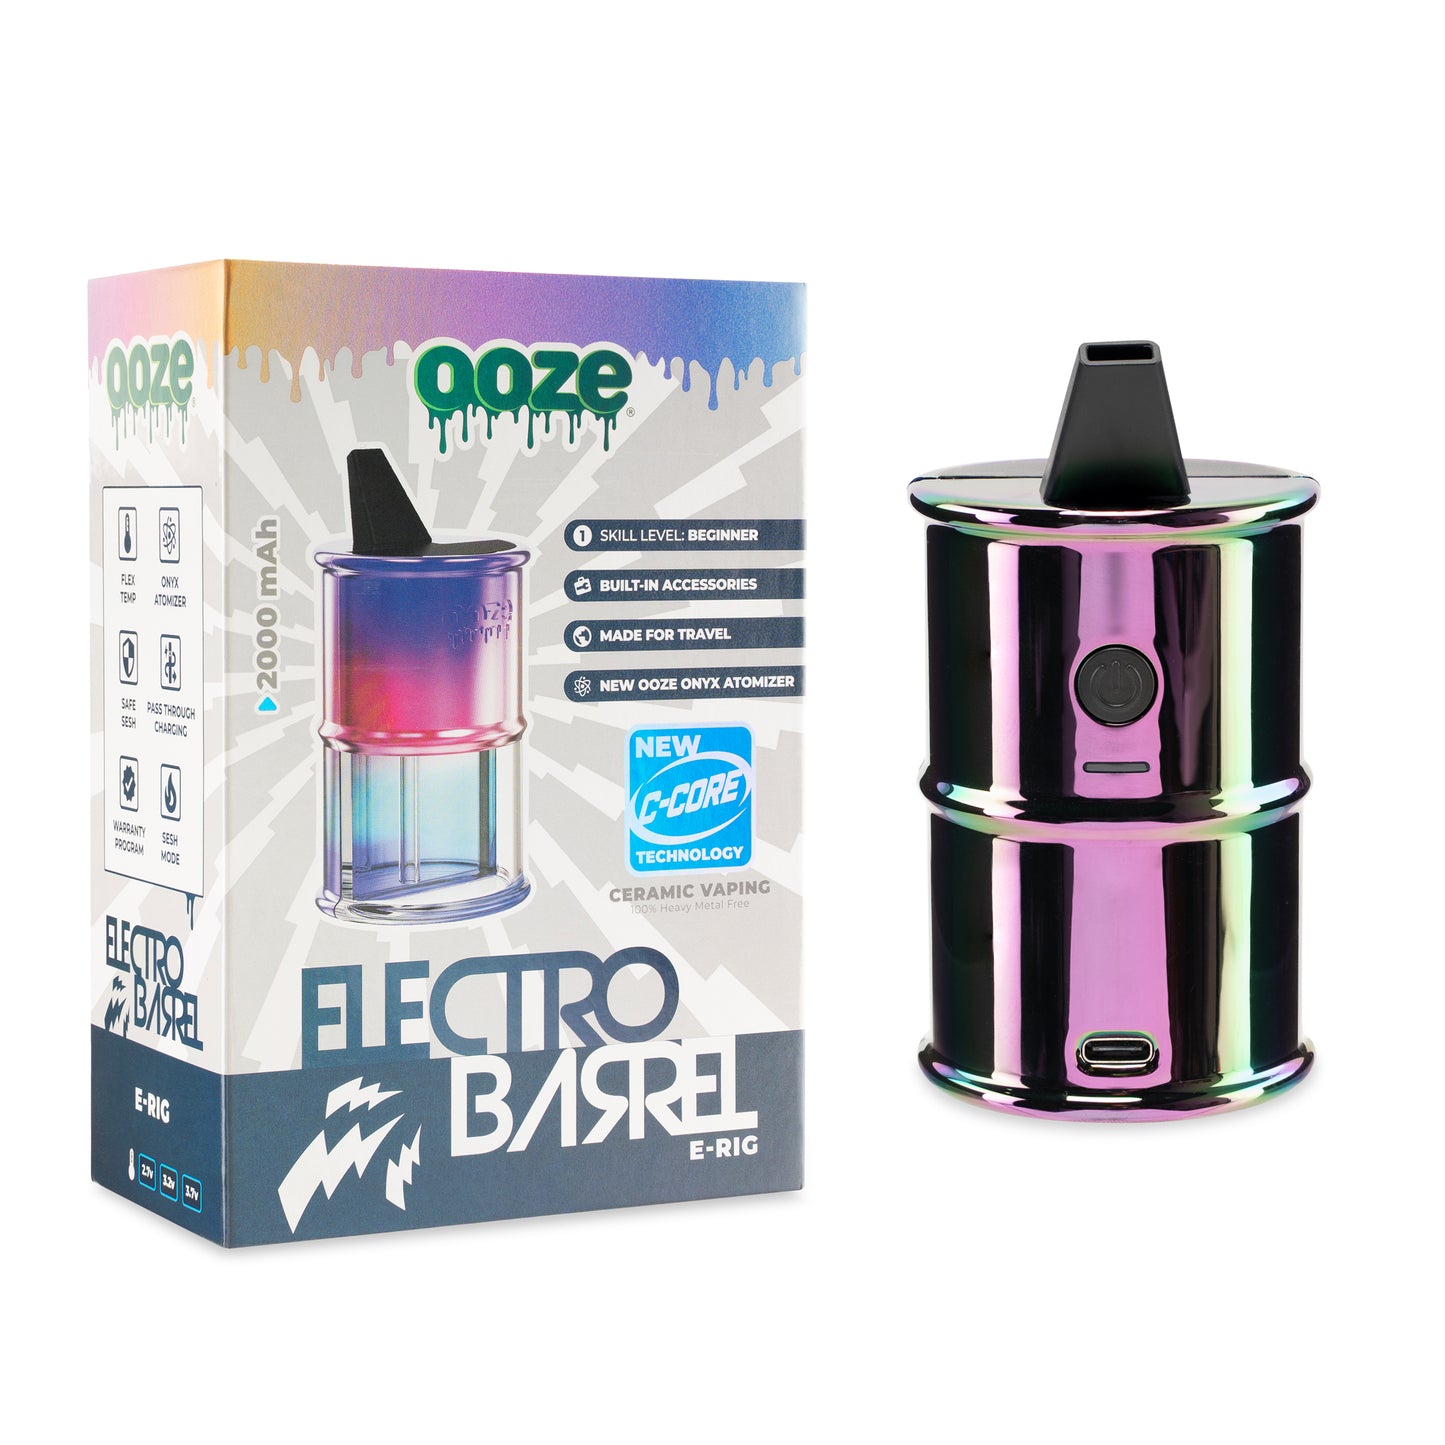 The Rainbow Ooze Electro Barrel E-Rig is shown next to its packaging.